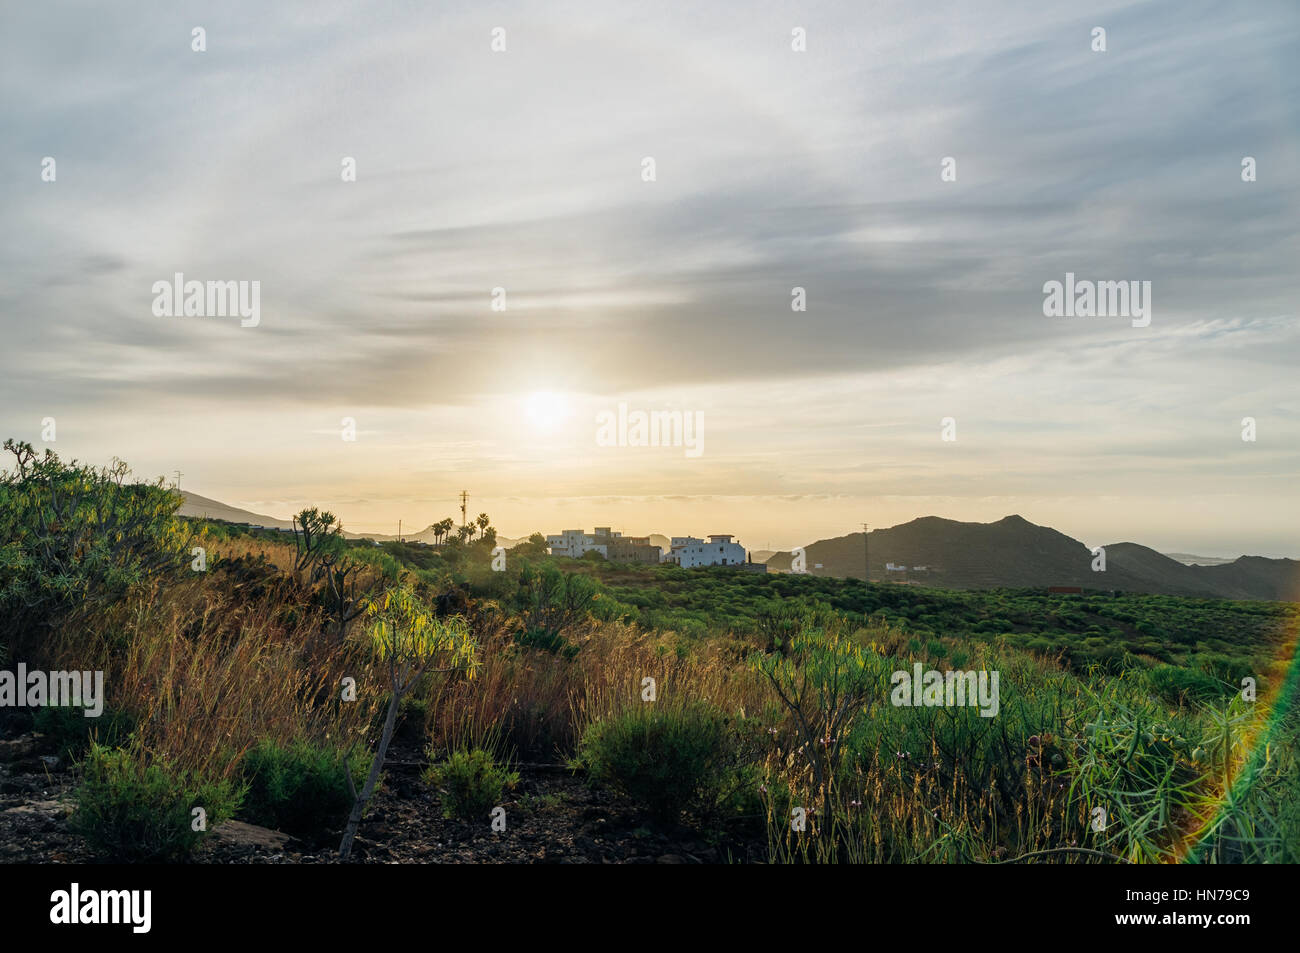 Rural landscape of Tenerife against morning sun with halo effect. Canary islands, Spain Stock Photo